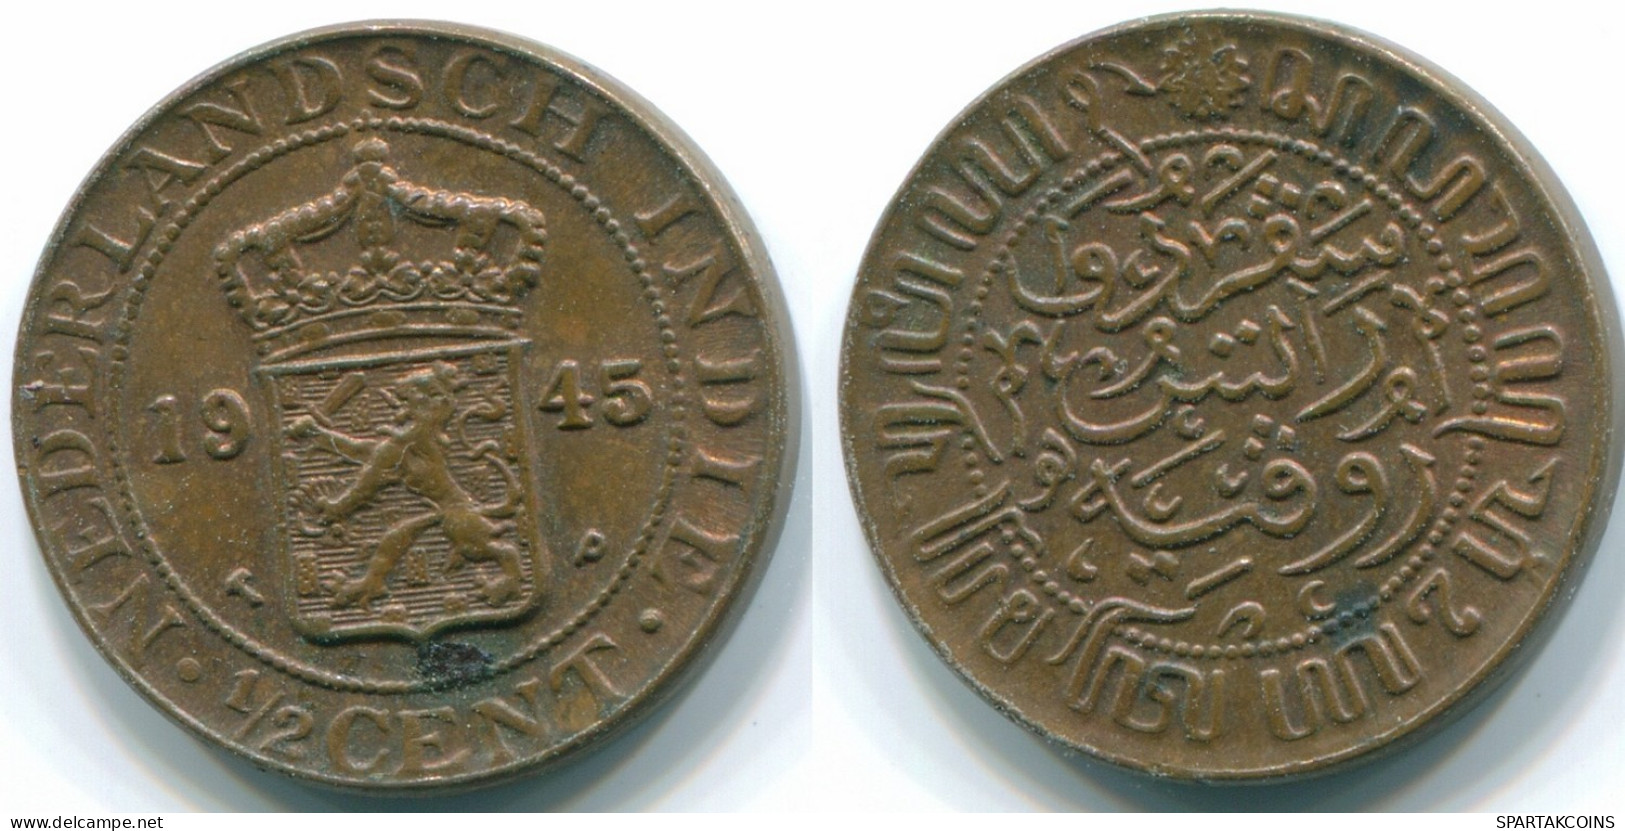 1/2 CENT 1945 NETHERLANDS EAST INDIES INDONESIA Bronze Colonial Coin #S13089.U.A - Dutch East Indies